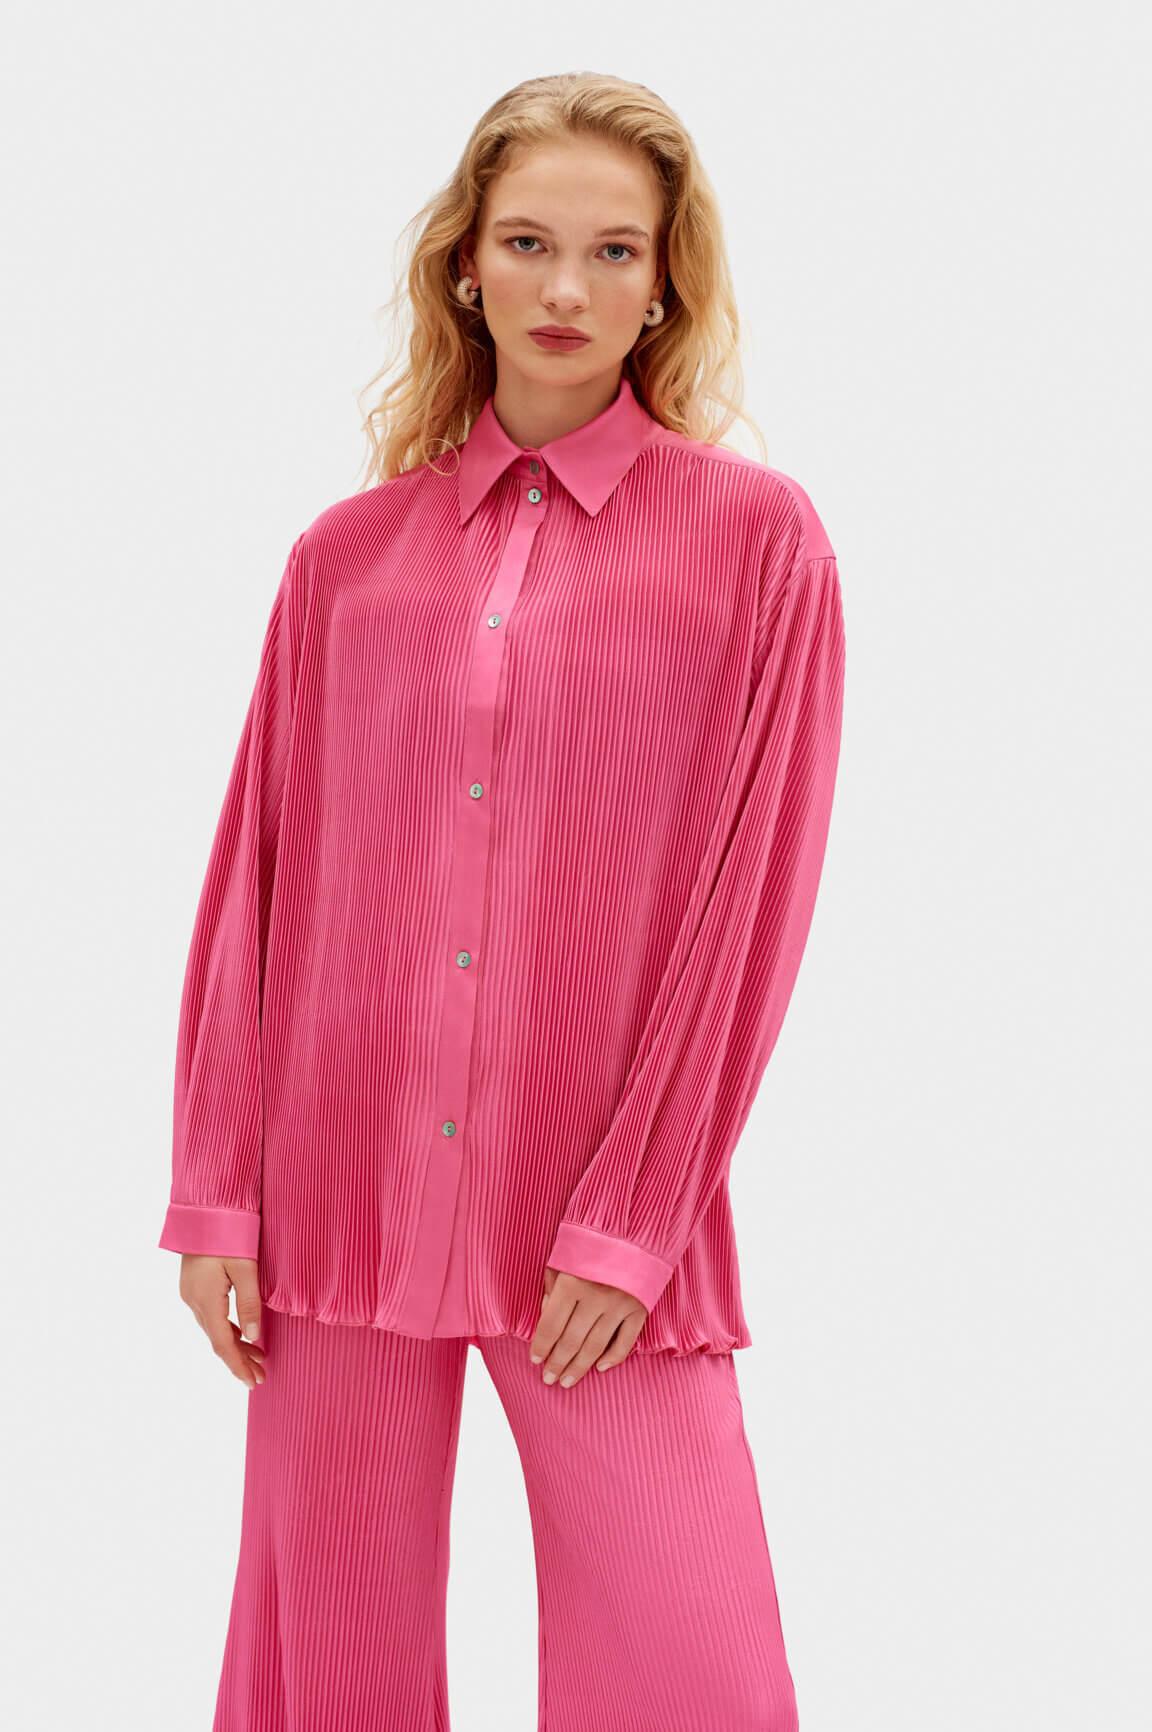 Sleeper Origami Pyjama Set With Pants In Hot Pink | Lyst